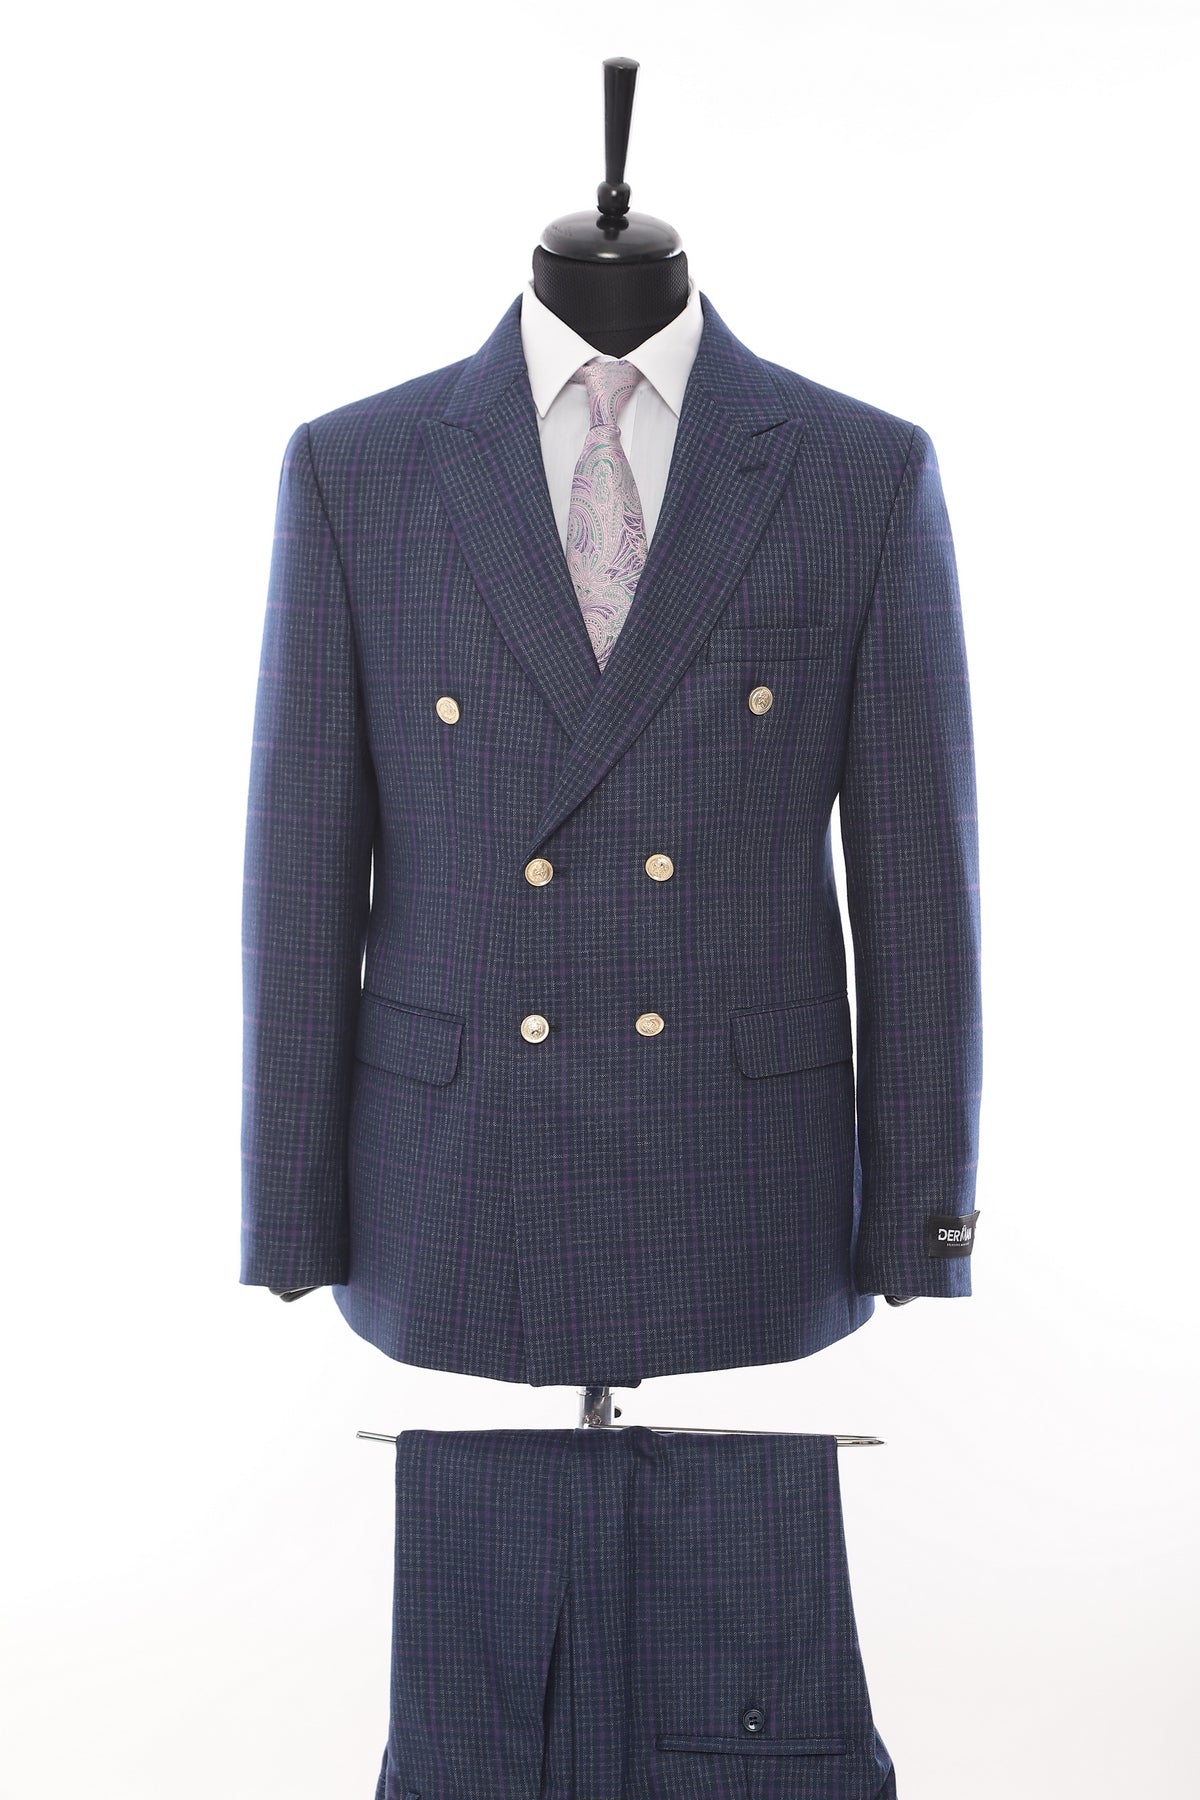 Double Breasted Navy Check Suit 2 Piece Suit